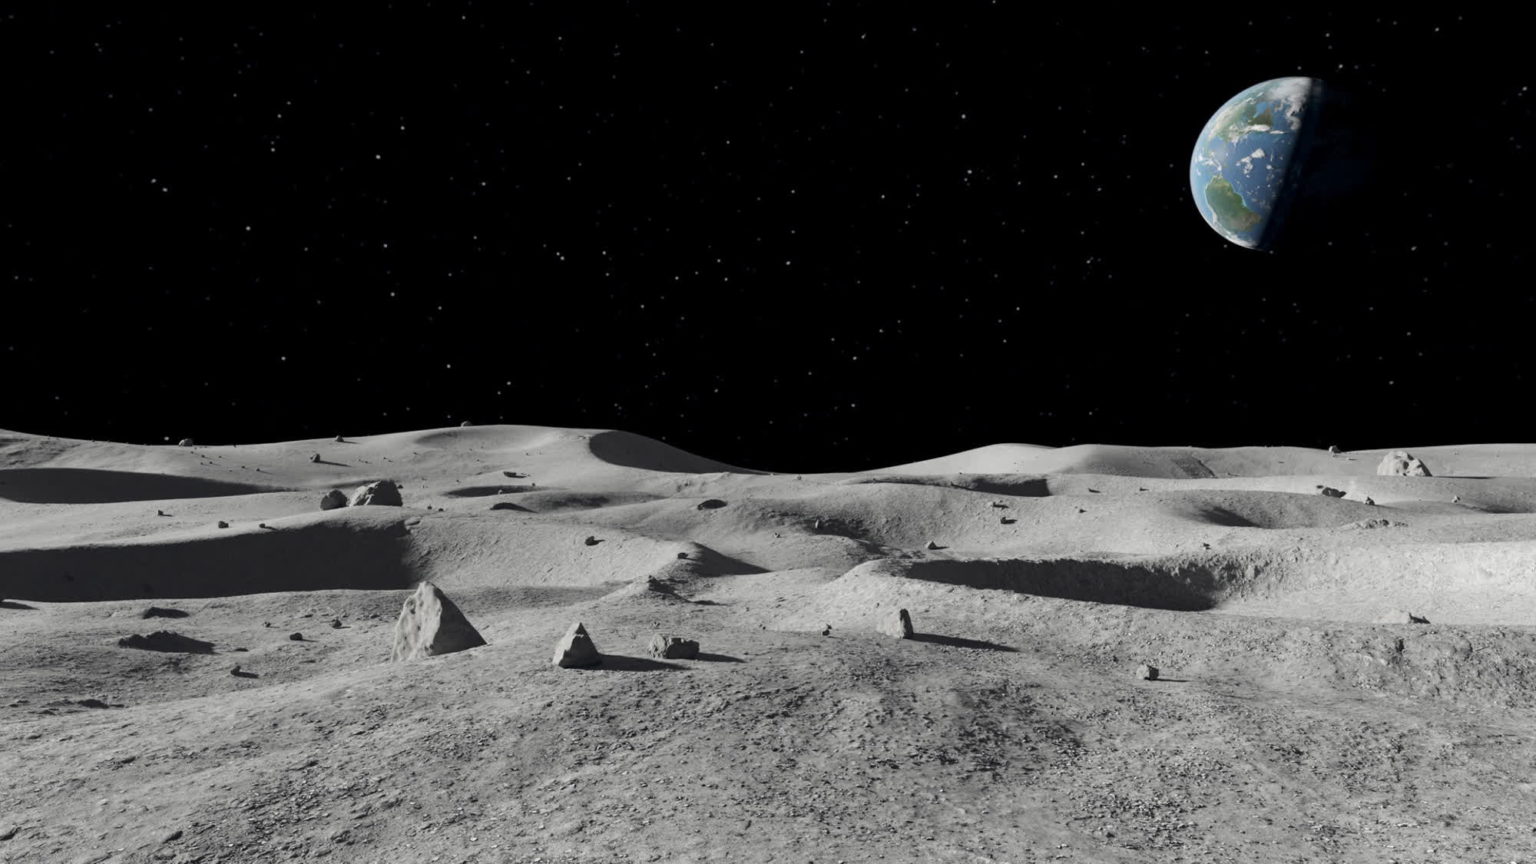 DARPA and Northrop Grumman are exploring the concept of a lunar train and railroad system